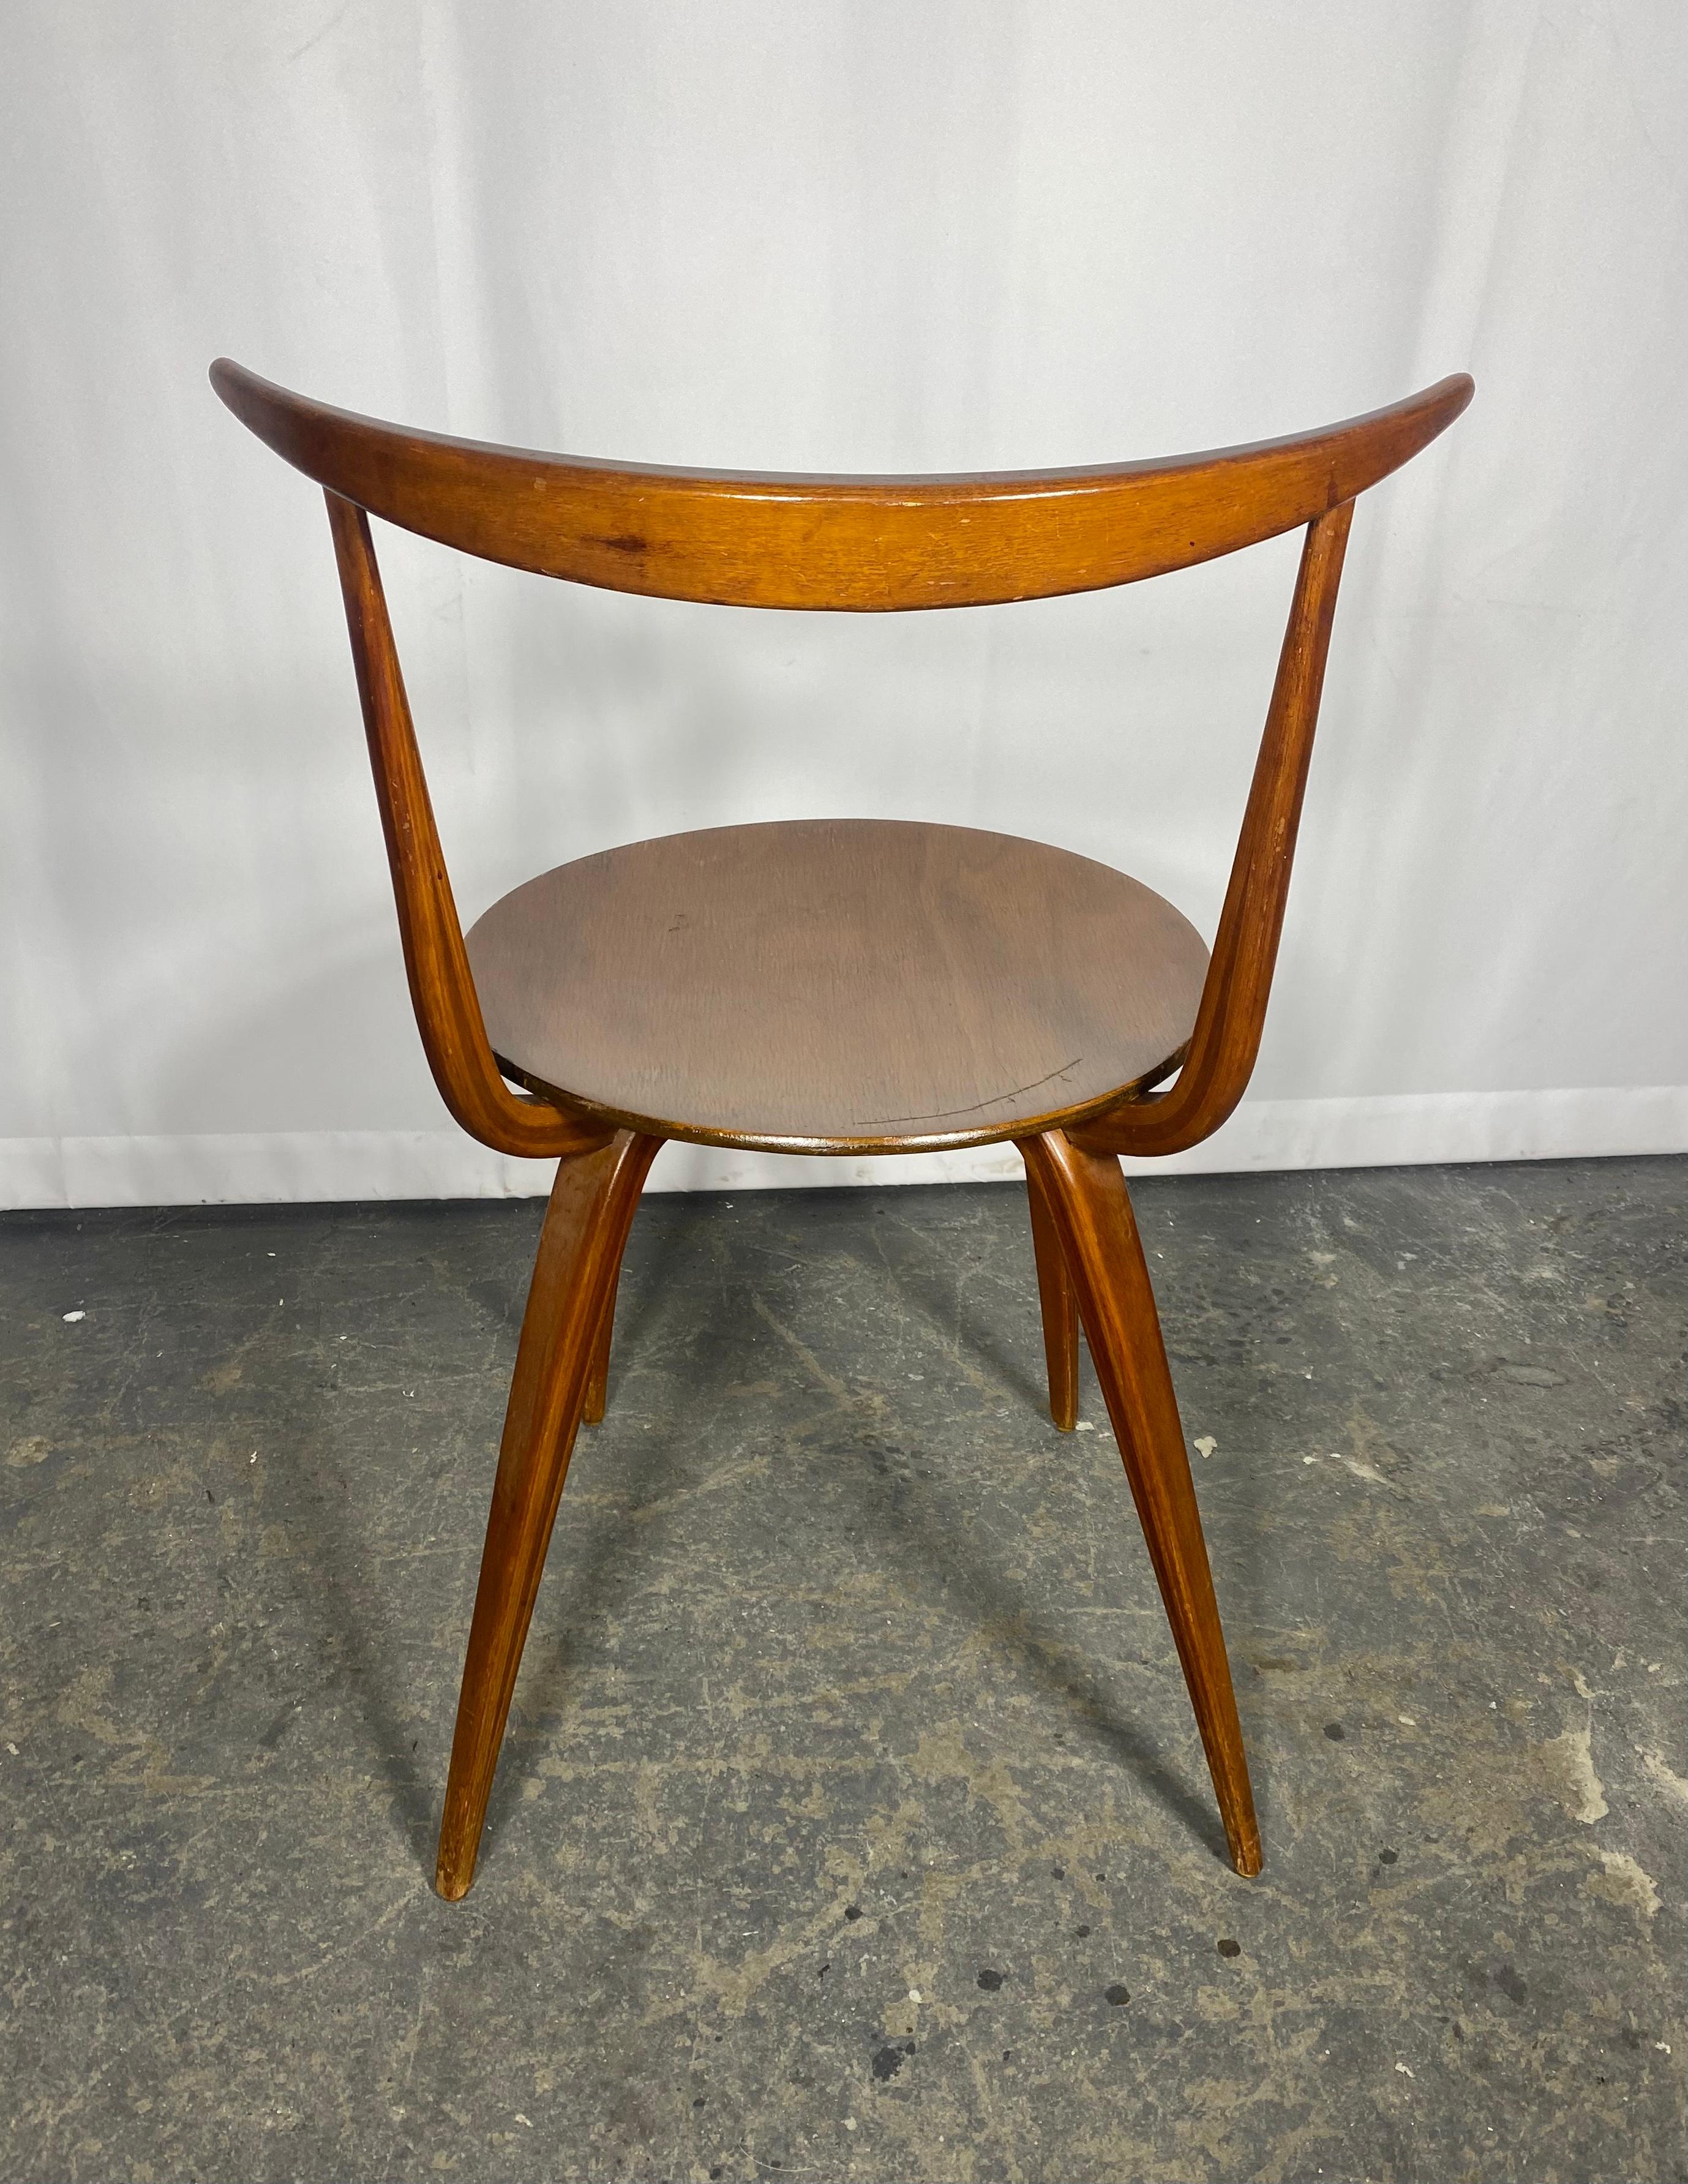 Early and Rare Pretzel sIDE Chair by George Nelson,  c 1952,,,  gREAT EXAMPLE, Iconic Design.  Becoming increasingly harder and harder to find..Nice original condition,, Age appropriate wear , 